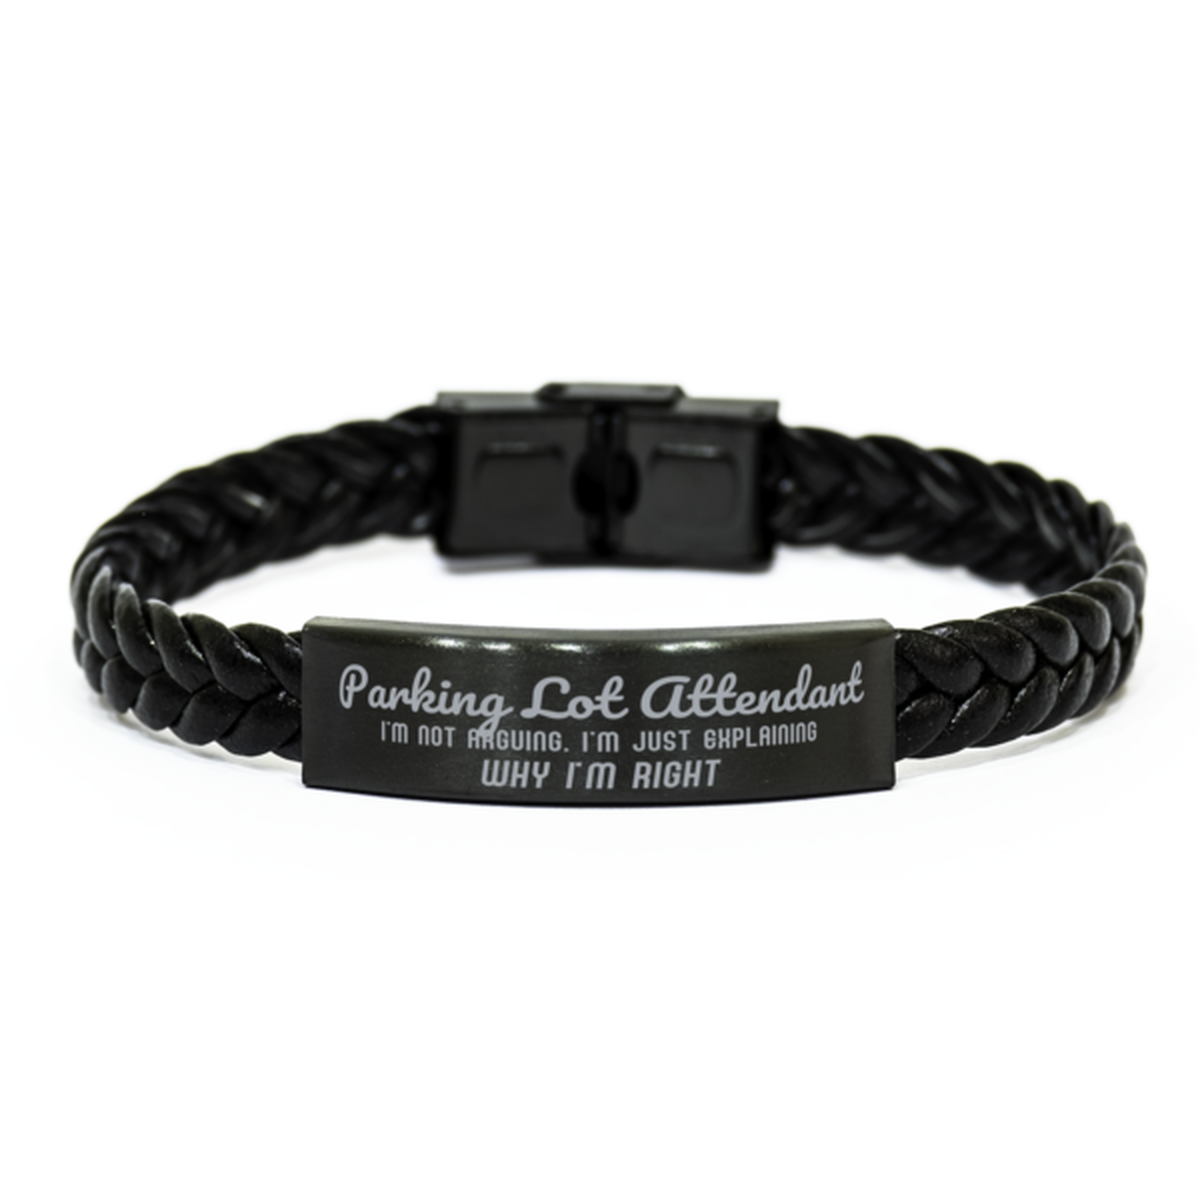 Parking Lot Attendant I'm not Arguing. I'm Just Explaining Why I'm RIGHT Braided Leather Bracelet, Graduation Birthday Christmas Parking Lot Attendant Gifts For Parking Lot Attendant Funny Saying Quote Present for Men Women Coworker